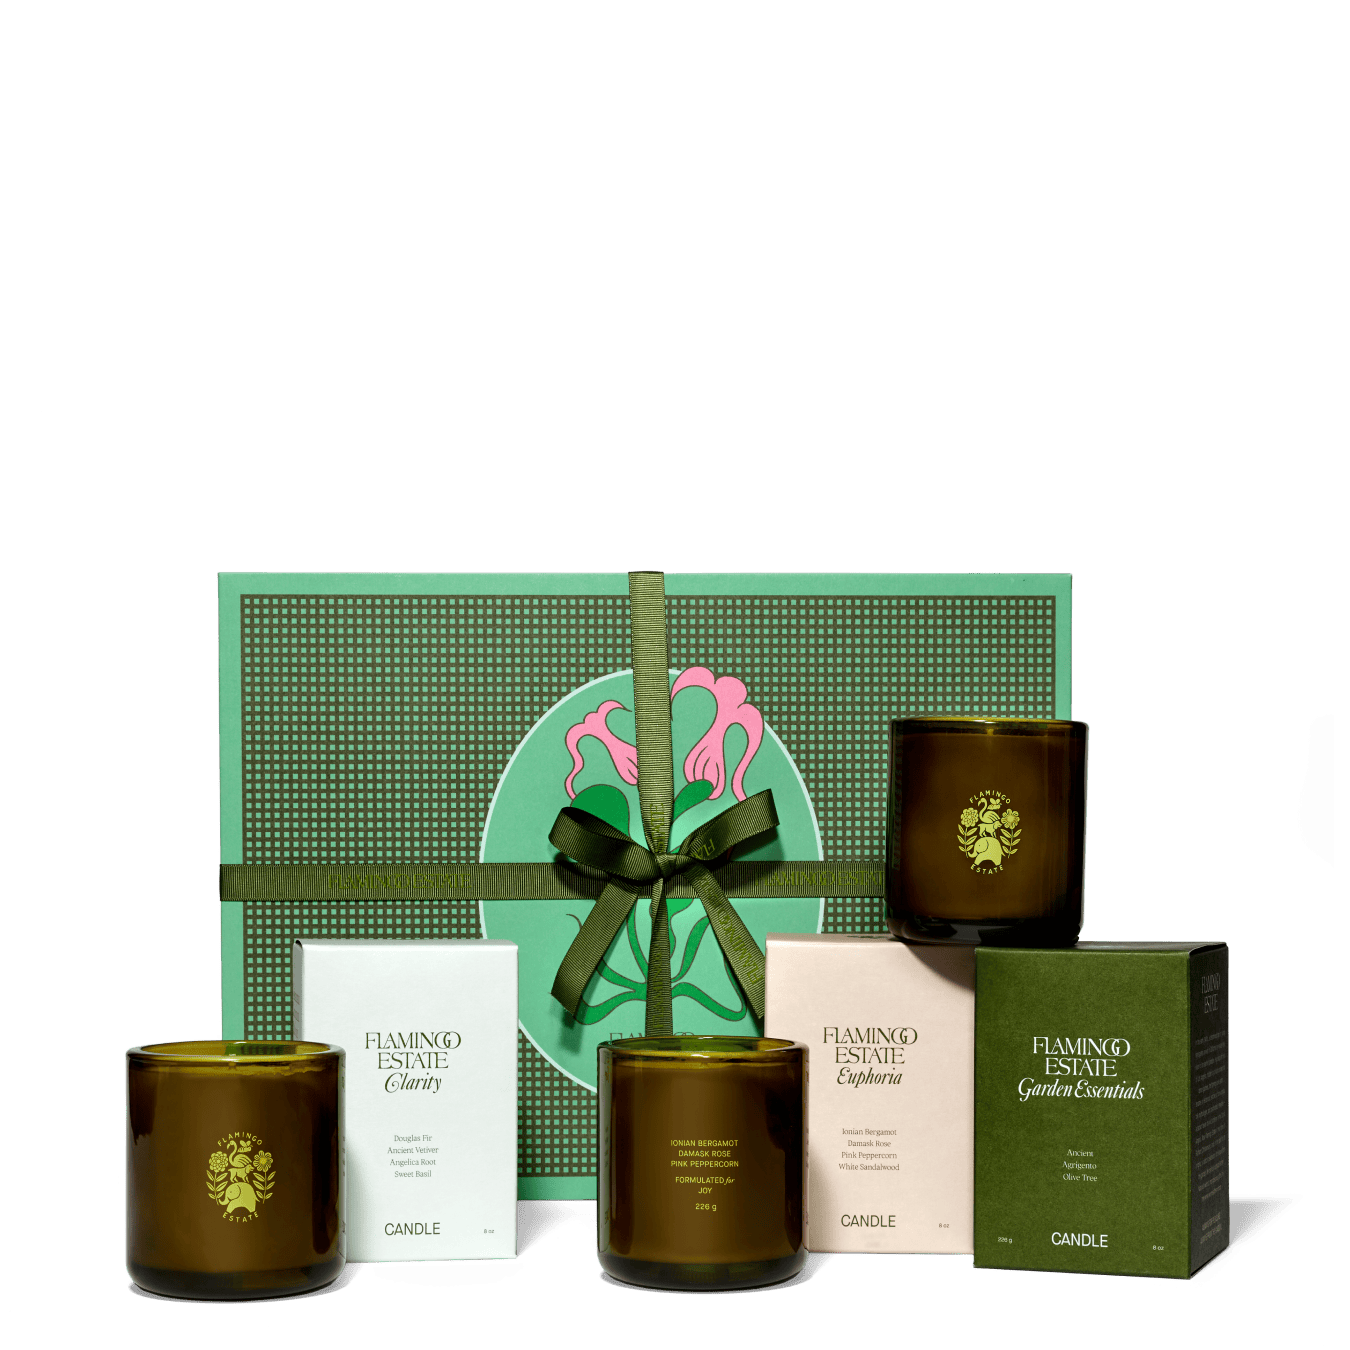 Flamingo Estate "Clarity", "Euphoria" And "Garden Essentials" Candles With Packaging Displayed In Front Of Green Gift Box